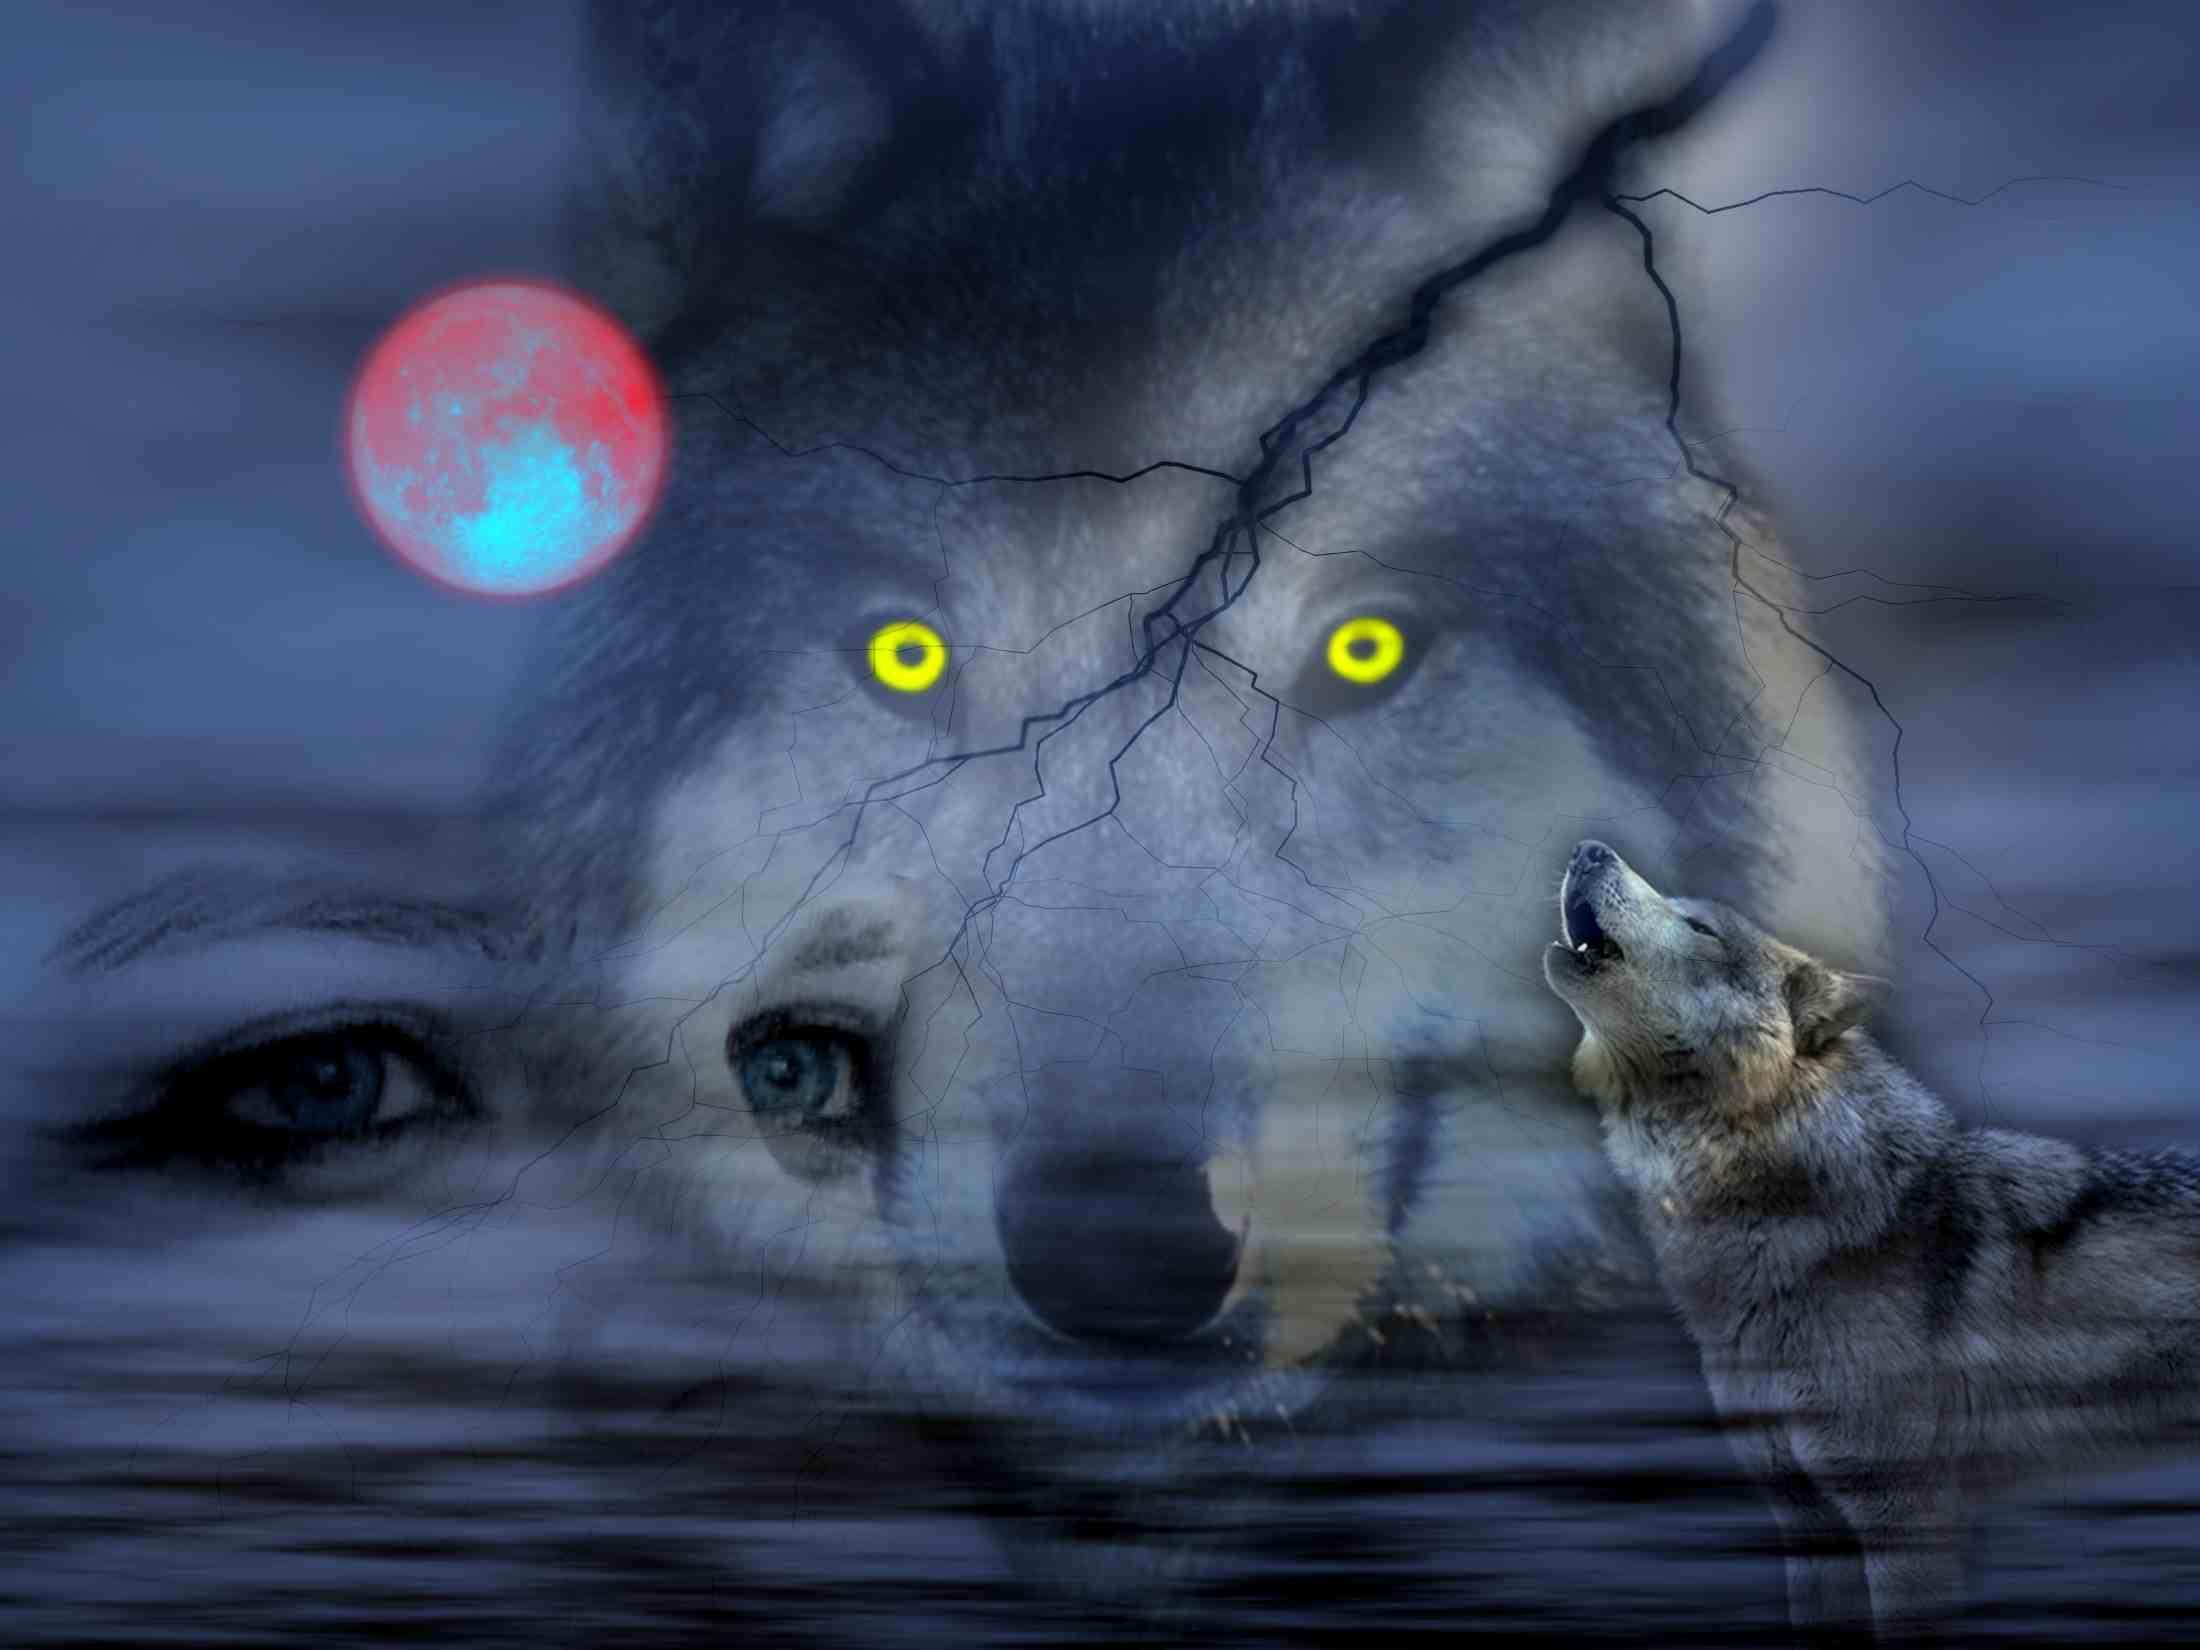 lupo wallpaper,wolf,canis lupus tundrarum,wildlife,snout,moonlight